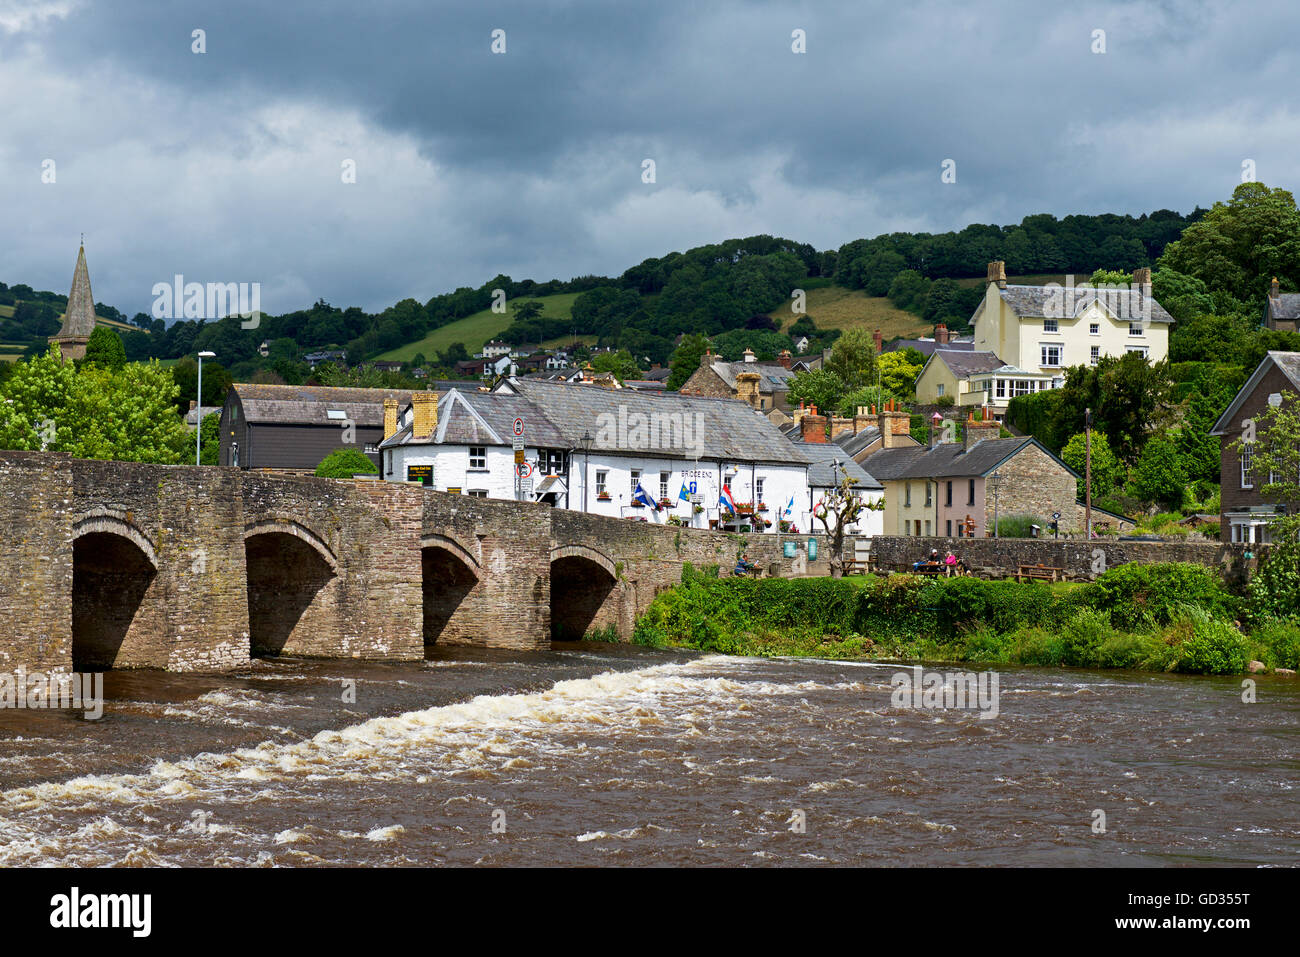 The old arched bridge over the River Usk, in Crickhowell, Powys, Wales UK Stock Photo